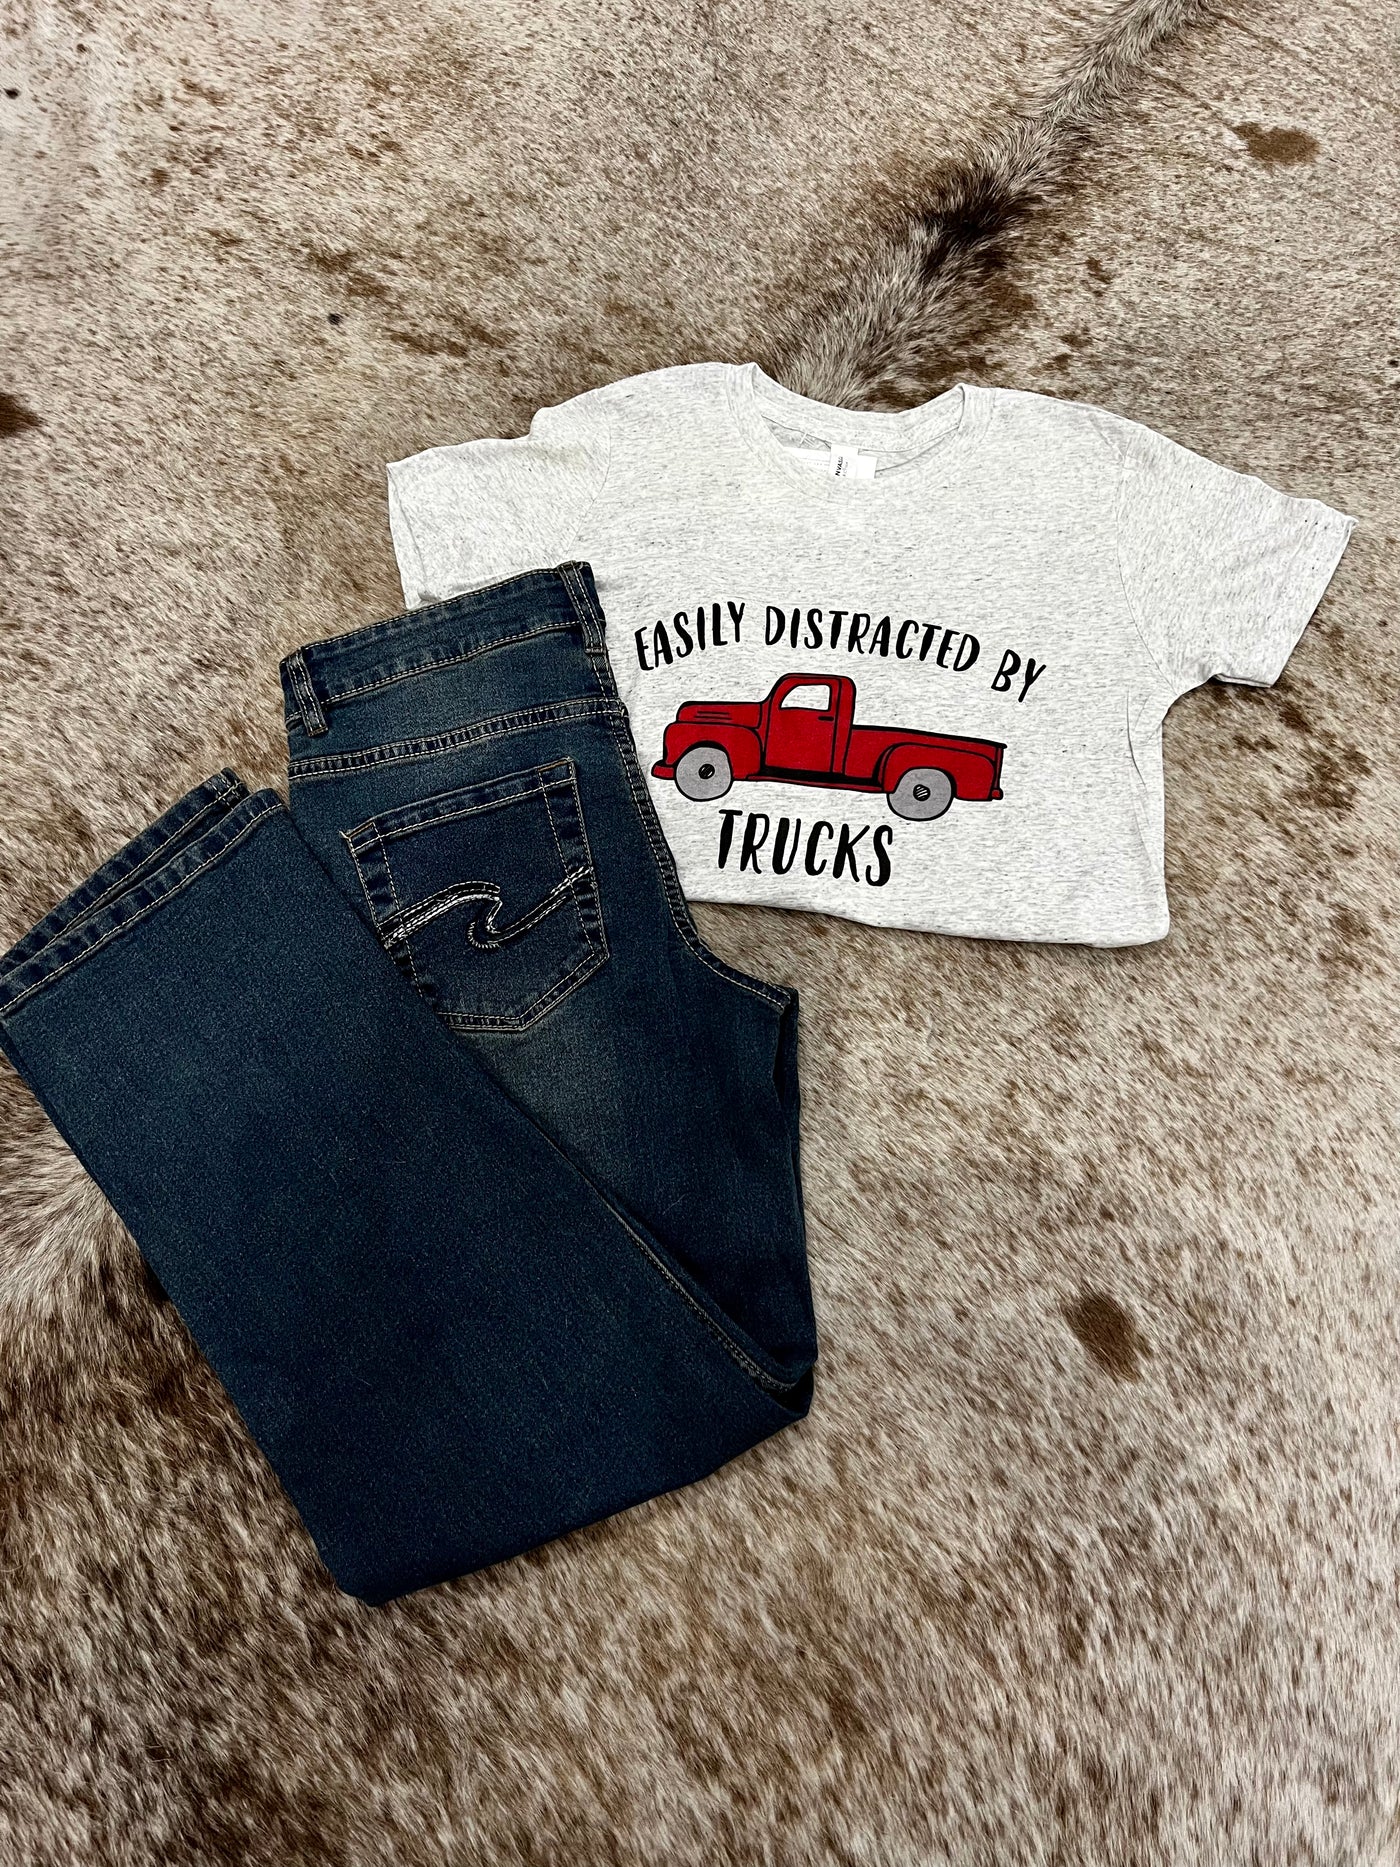 G3 Easily Distracted By Trucks Youth Tee